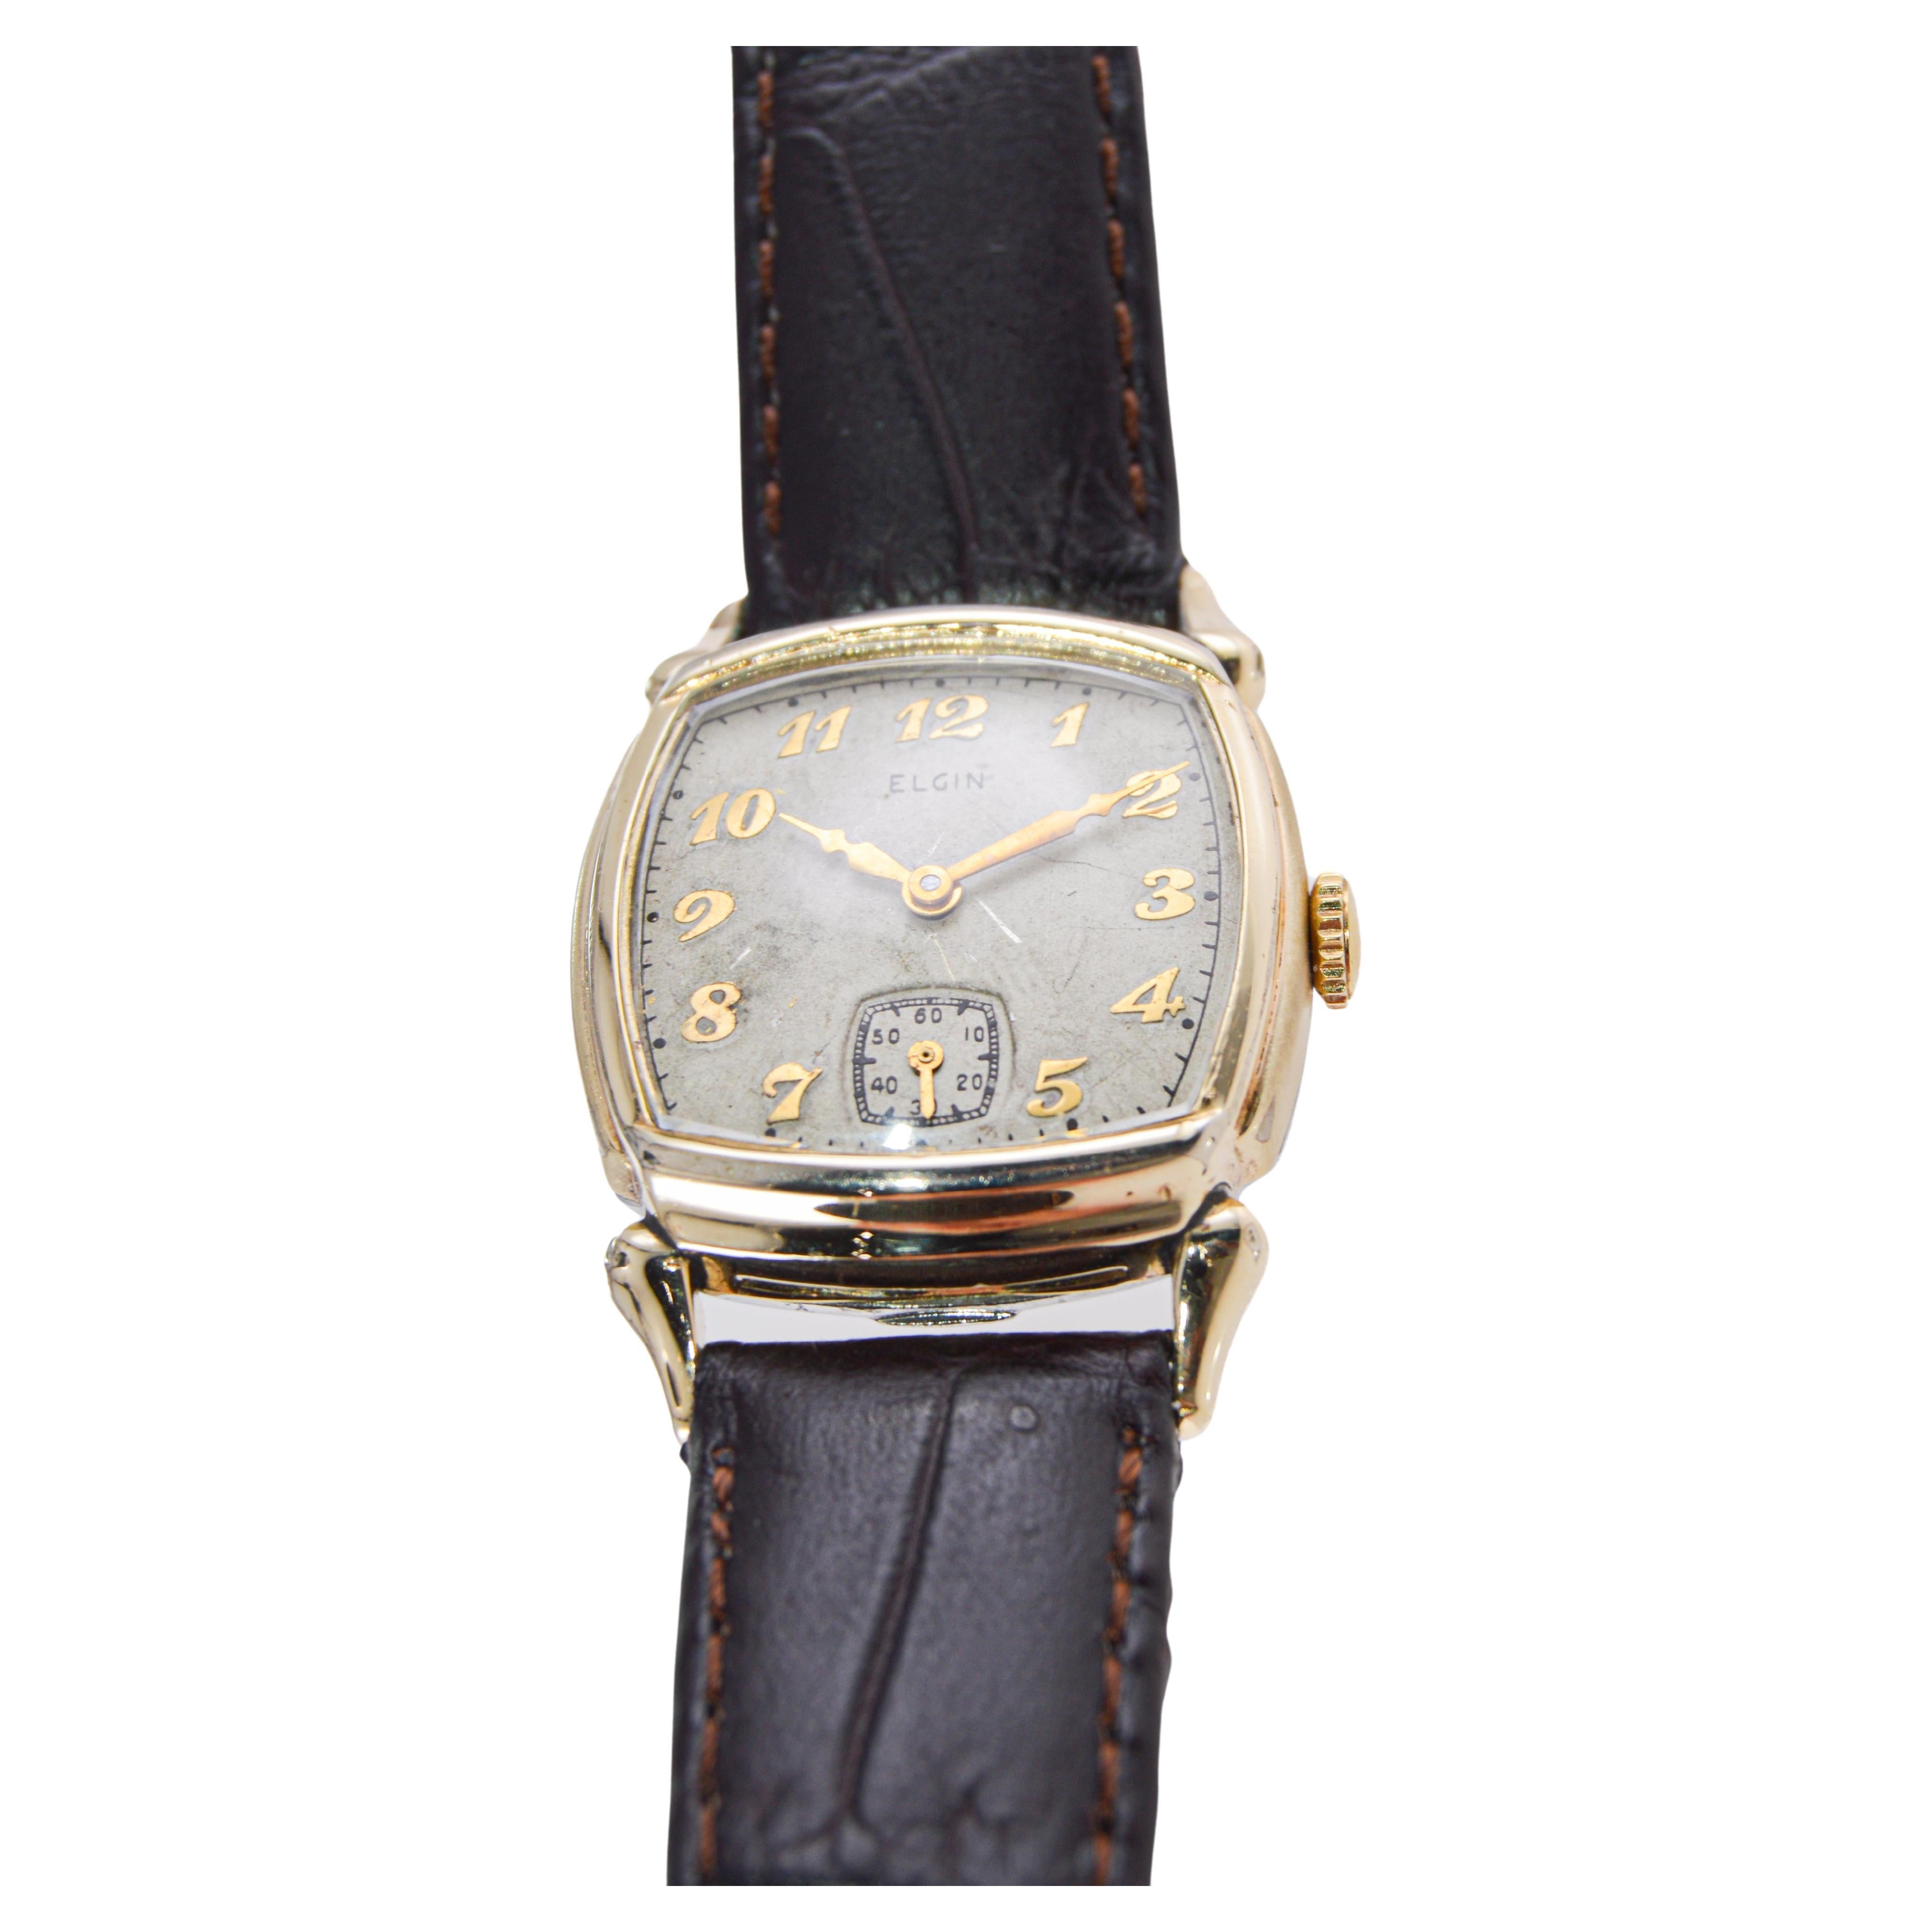 Elgin Gold Filled Art Deco Cushion Shaped American Watch with Original Dial 1940 For Sale 2